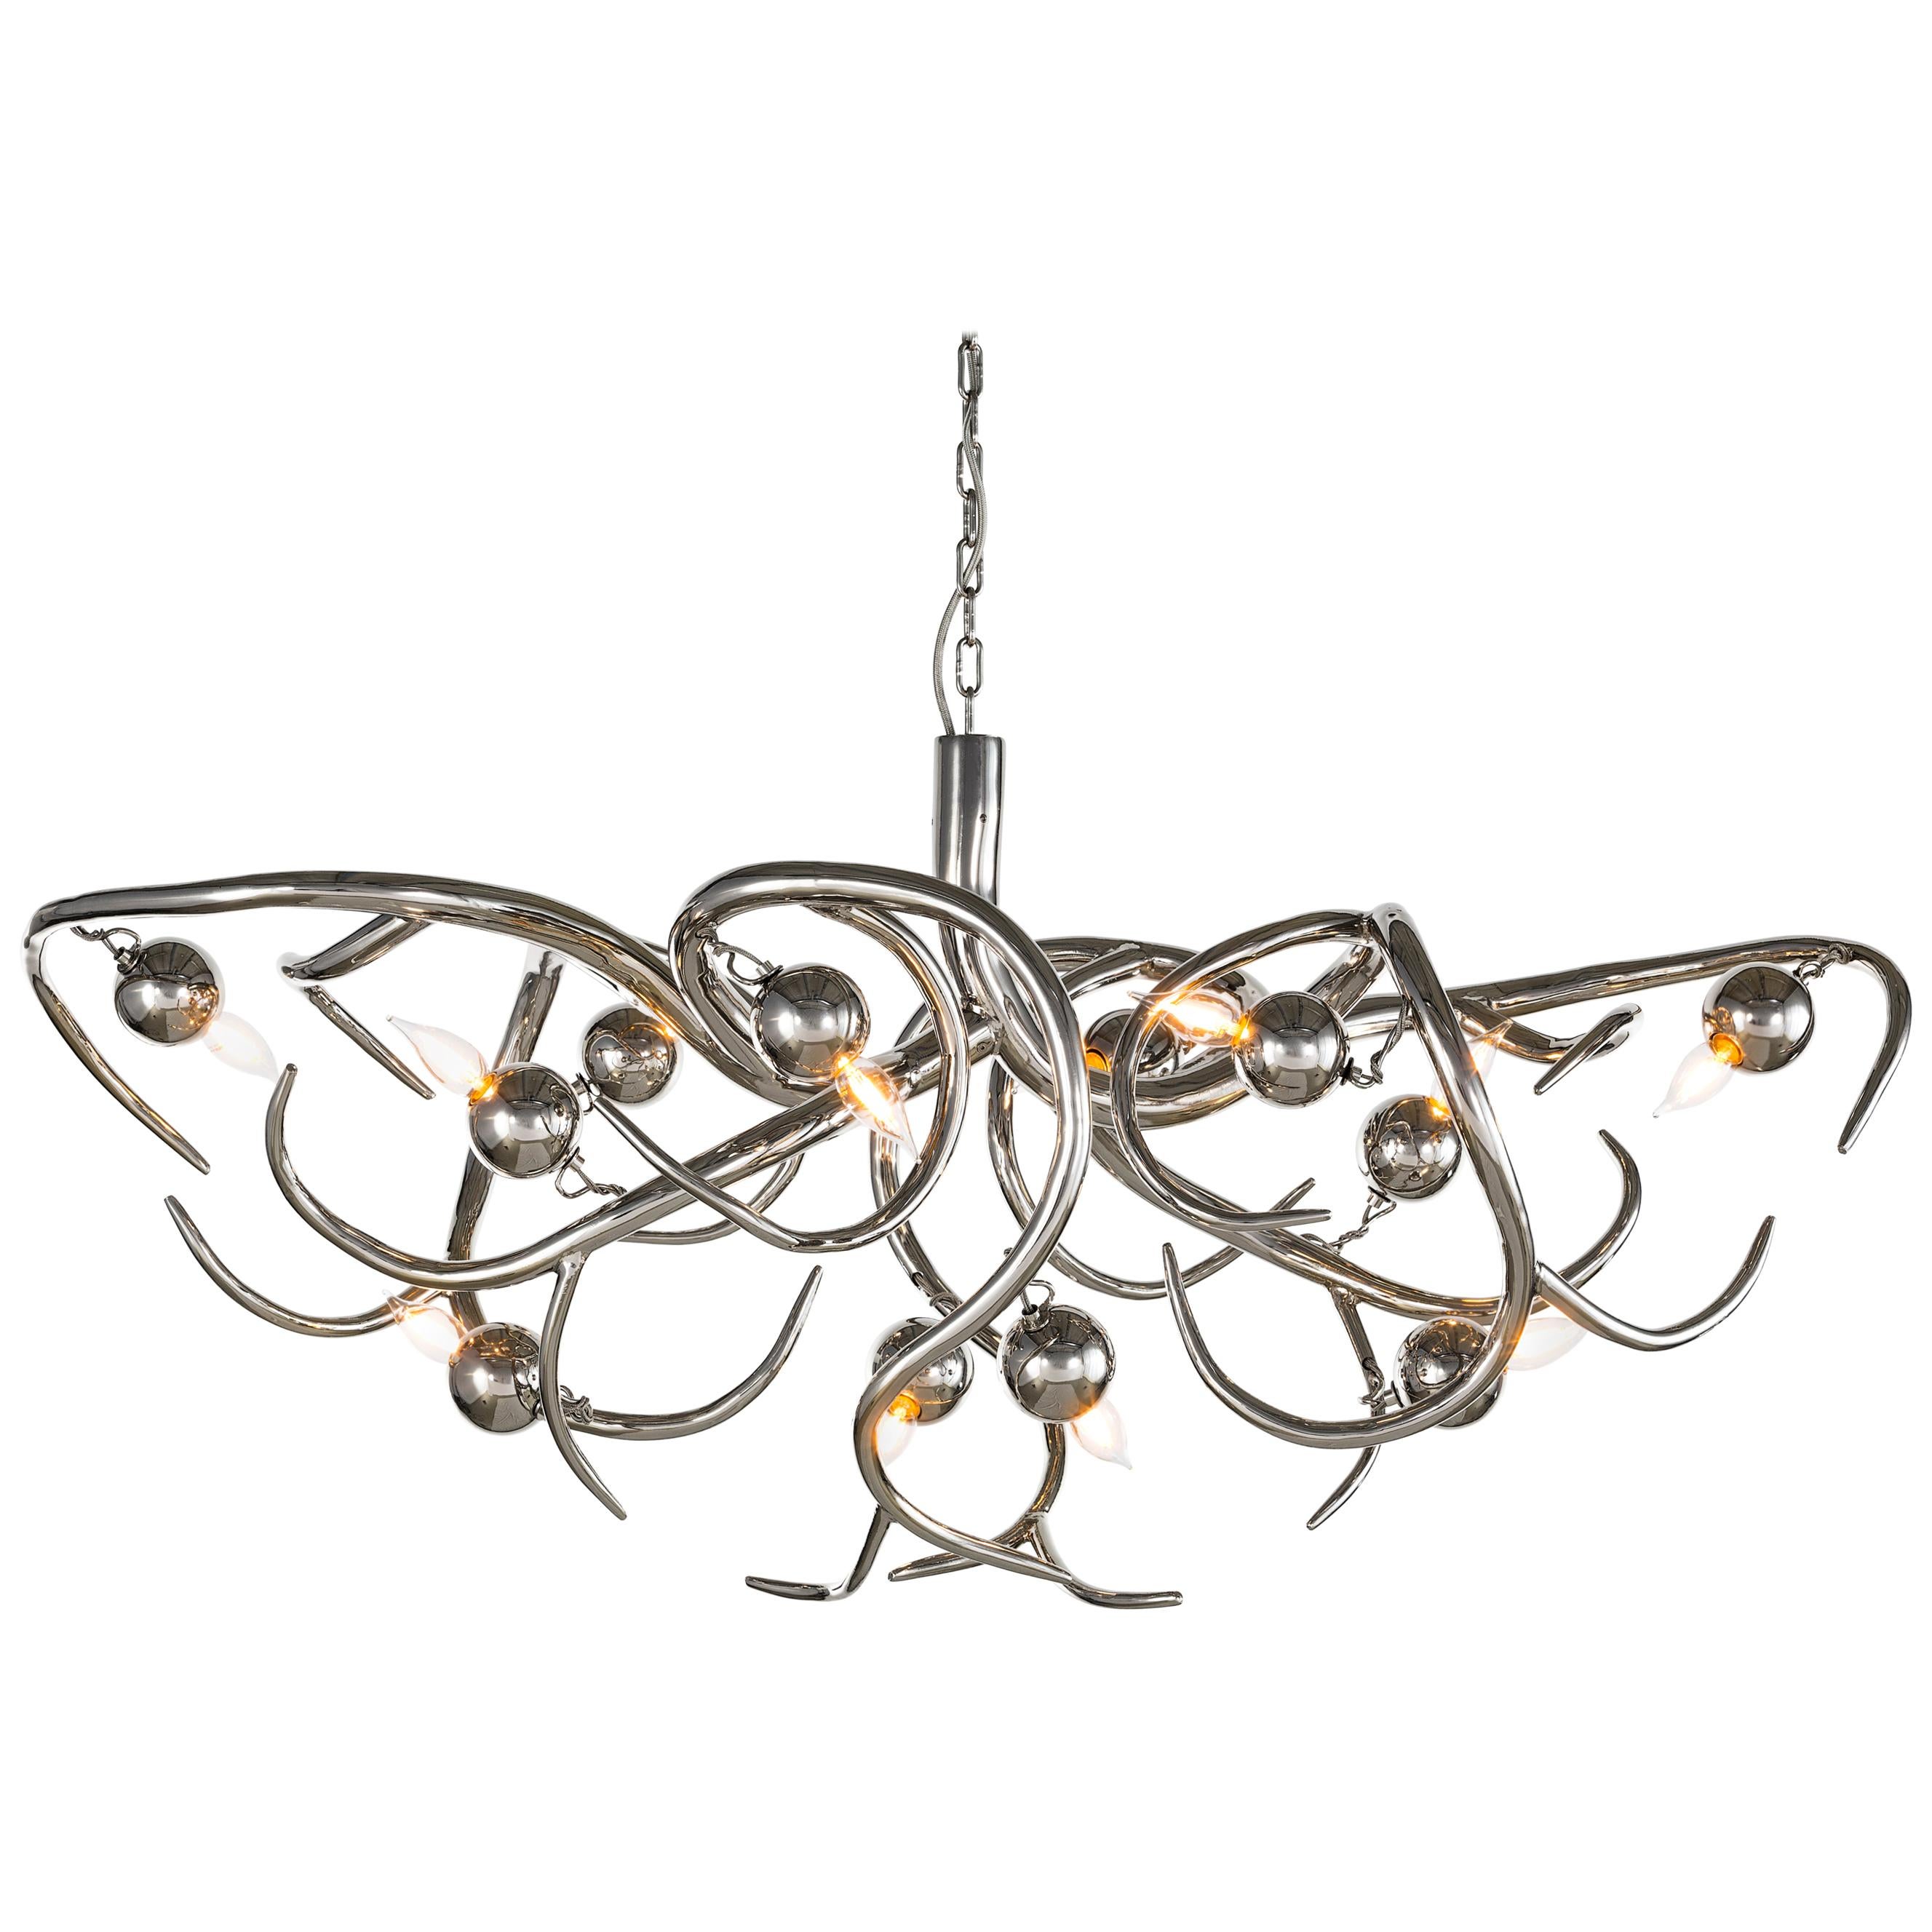 Modern Chandelier in a Nickel Finish, Eve Collection, by Brand Van Egmond For Sale